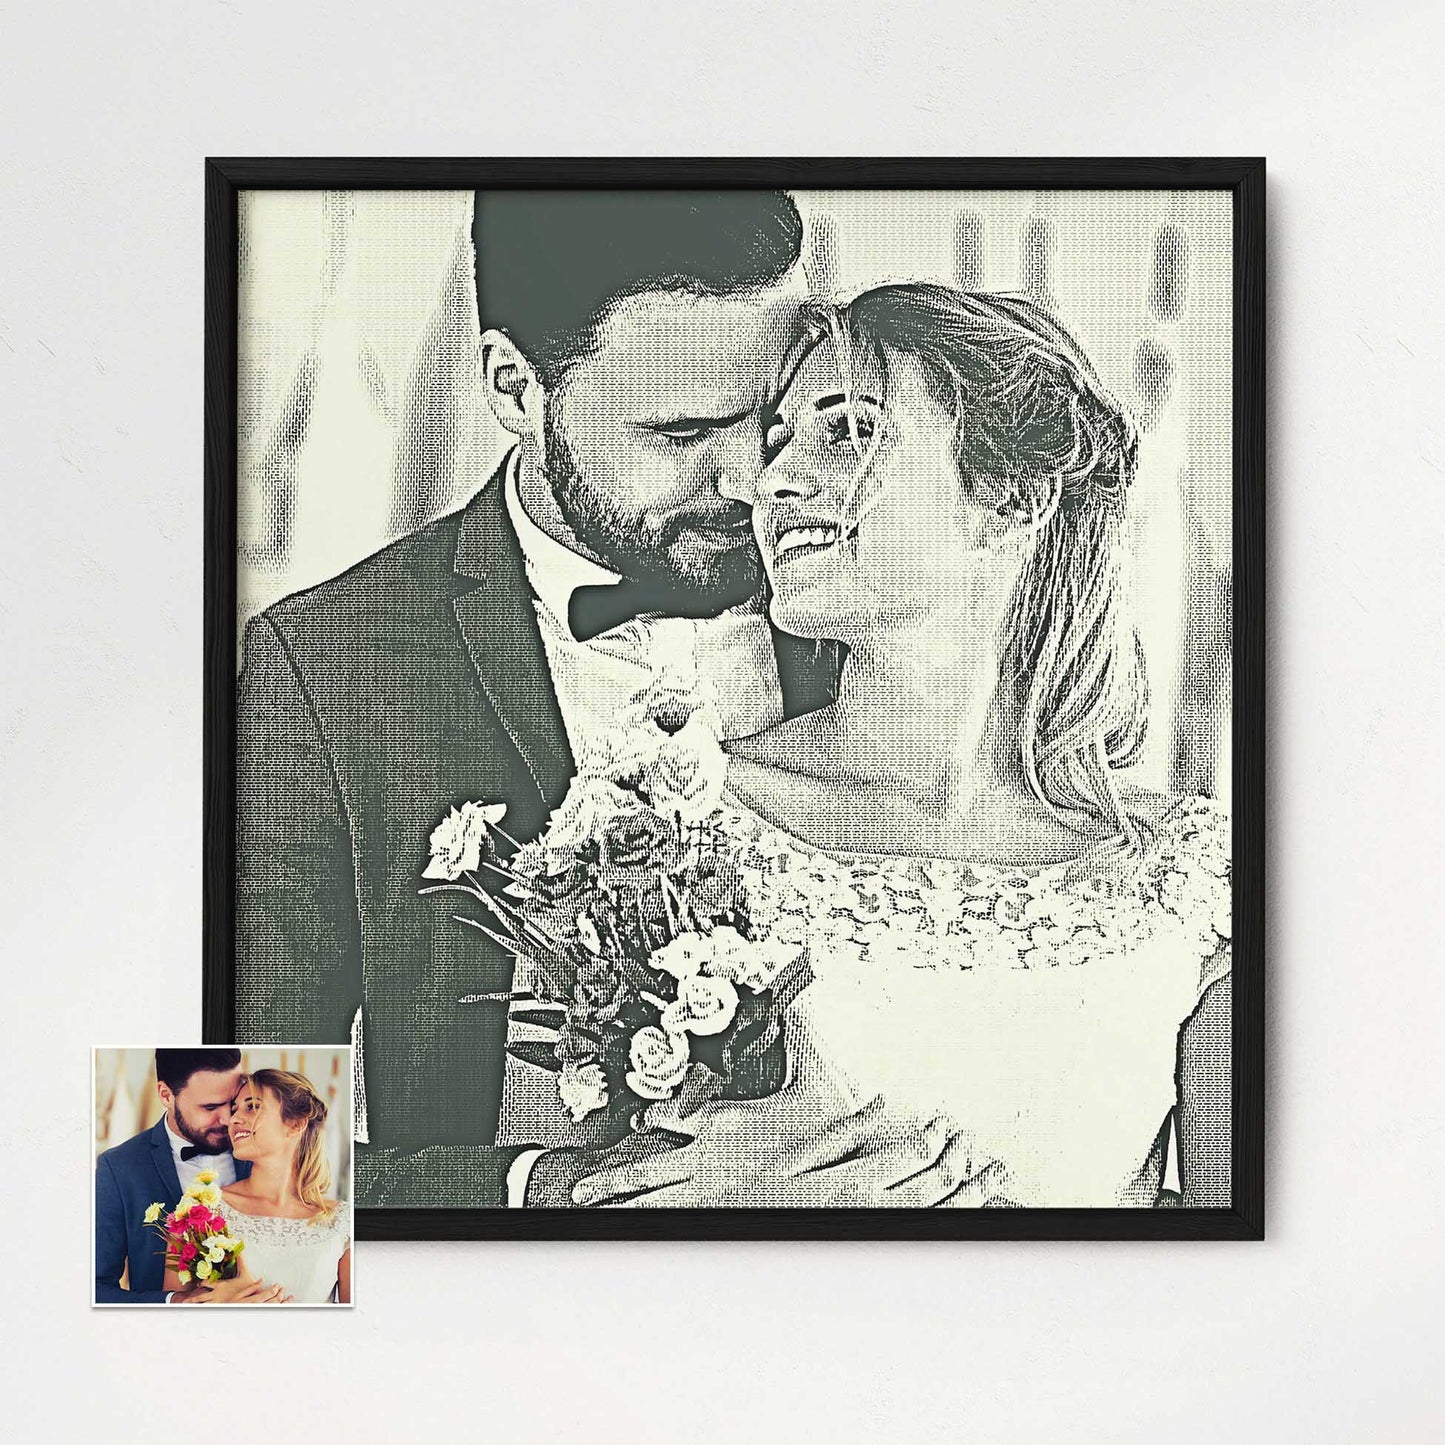 Experience the epitome of sophistication with our Personalised Money Engraved Framed Print. Its fine digital art engraving captures the essence of luxury and elegance. This unique and creative artwork, printed from your own photo